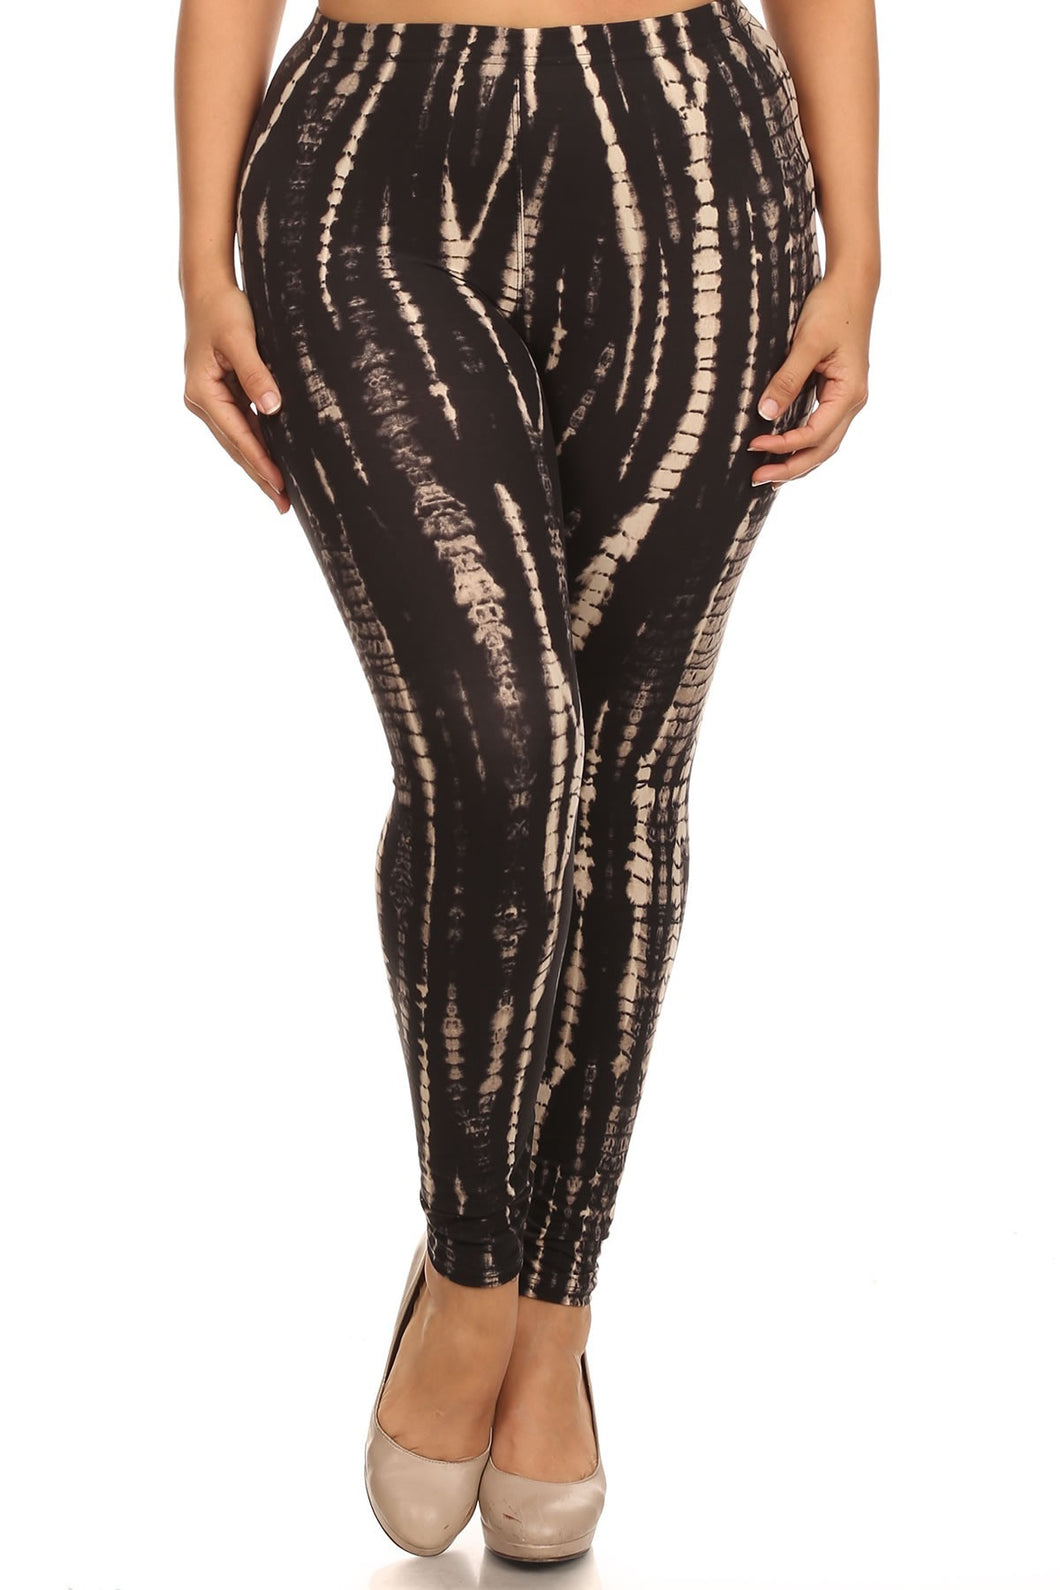 Plus Size Black & Tan tie dye Cropped Leggings With Banded High Waist